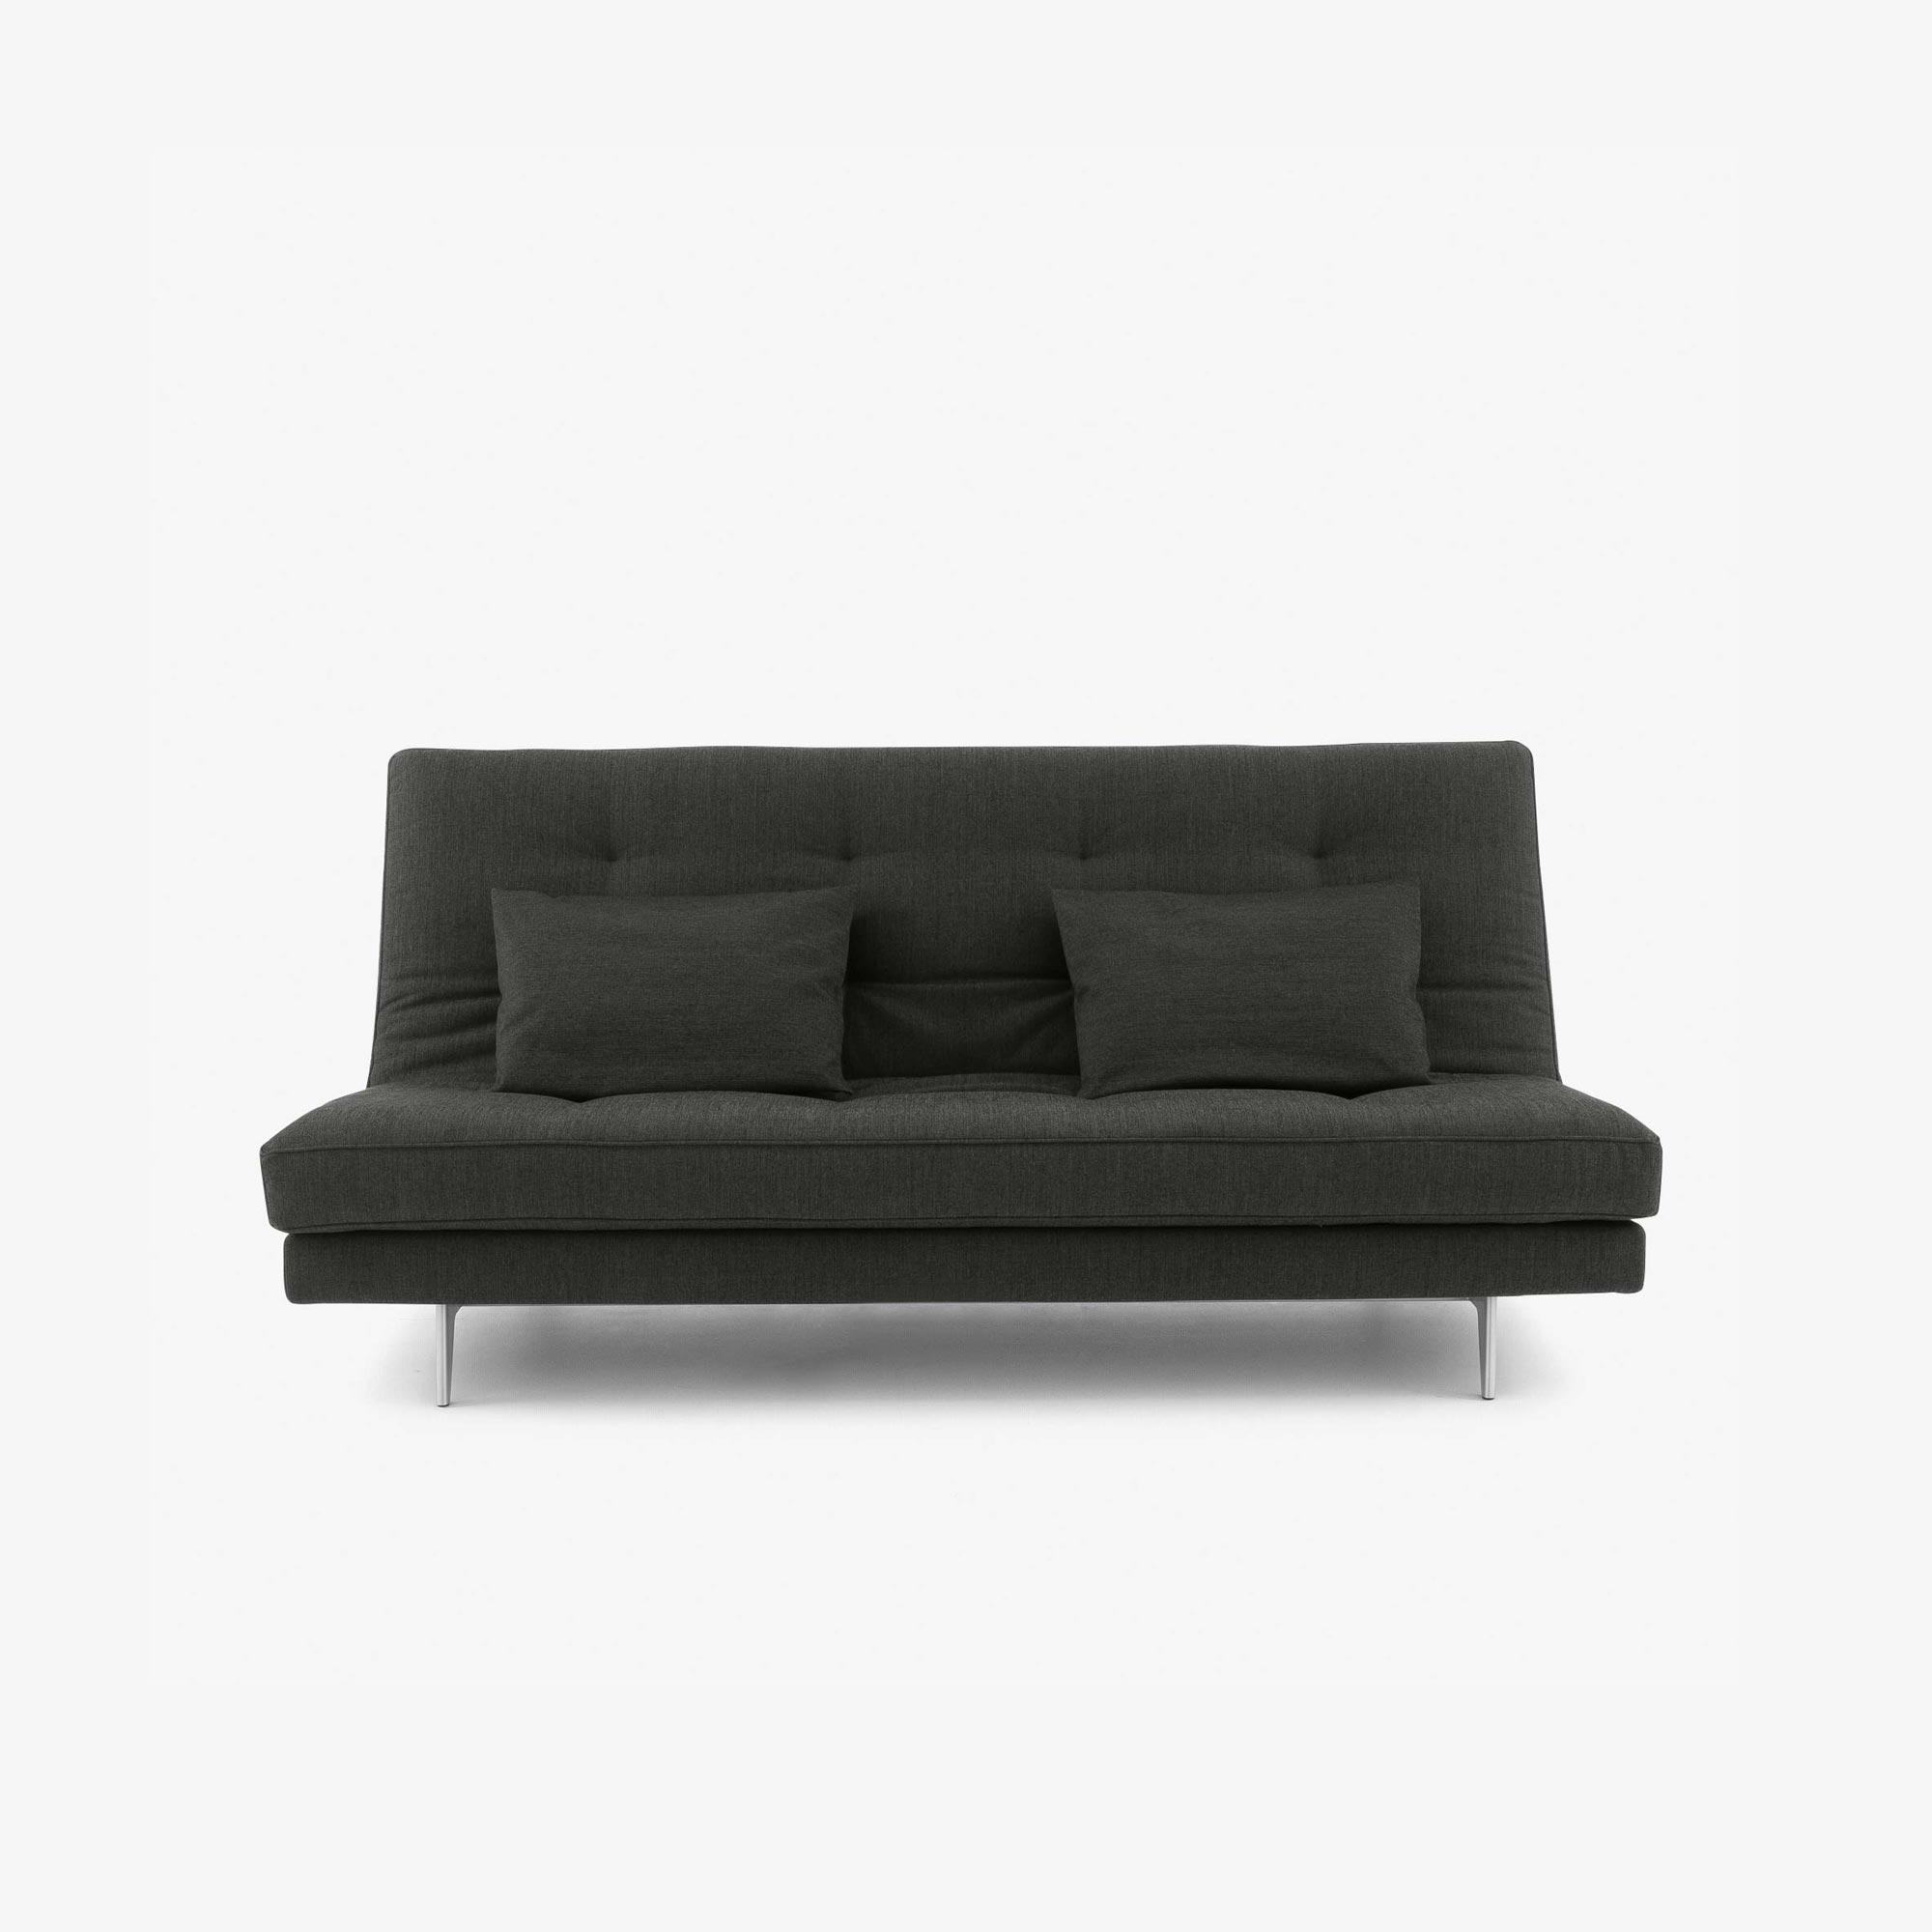 Image BED SETTEE 'VERSION 2' 